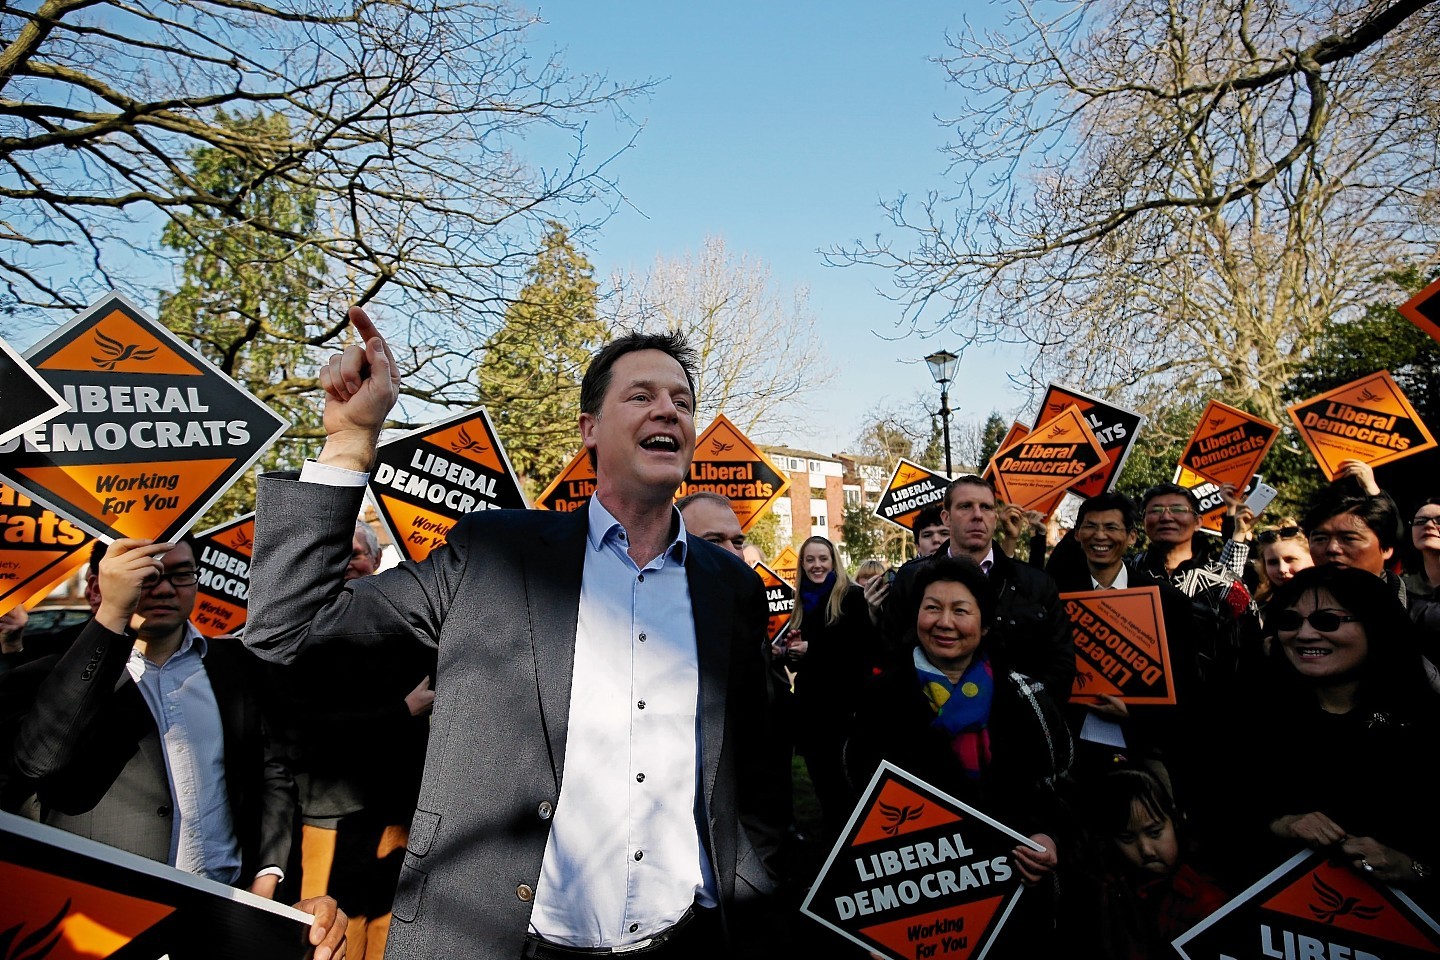 Liberal Democrat leader Nick Clegg meets supporters while out campaigning in Surbiton, London.